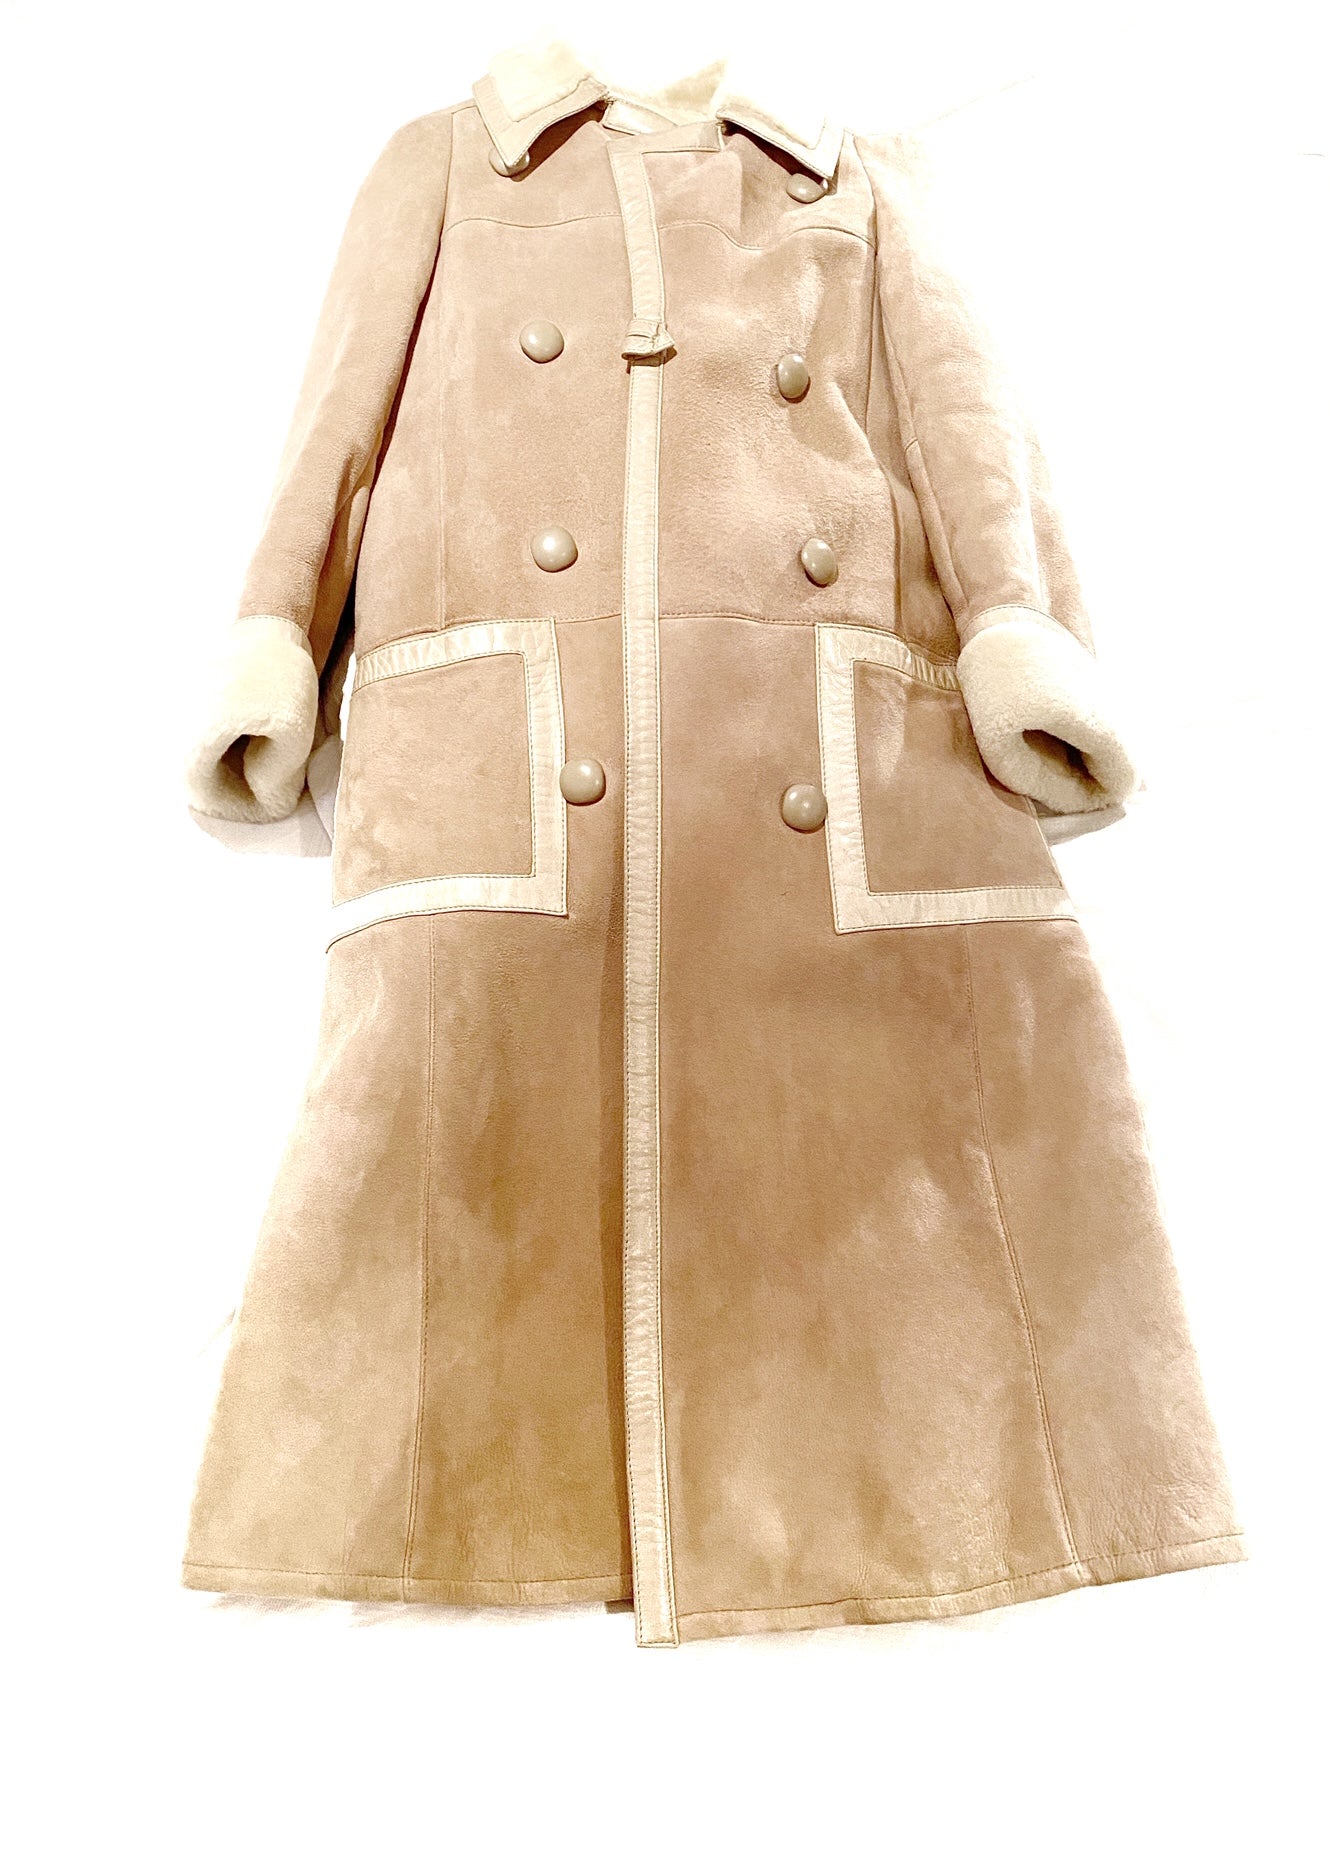 dior shearling coat, beige sheepskin, full length with buttons.